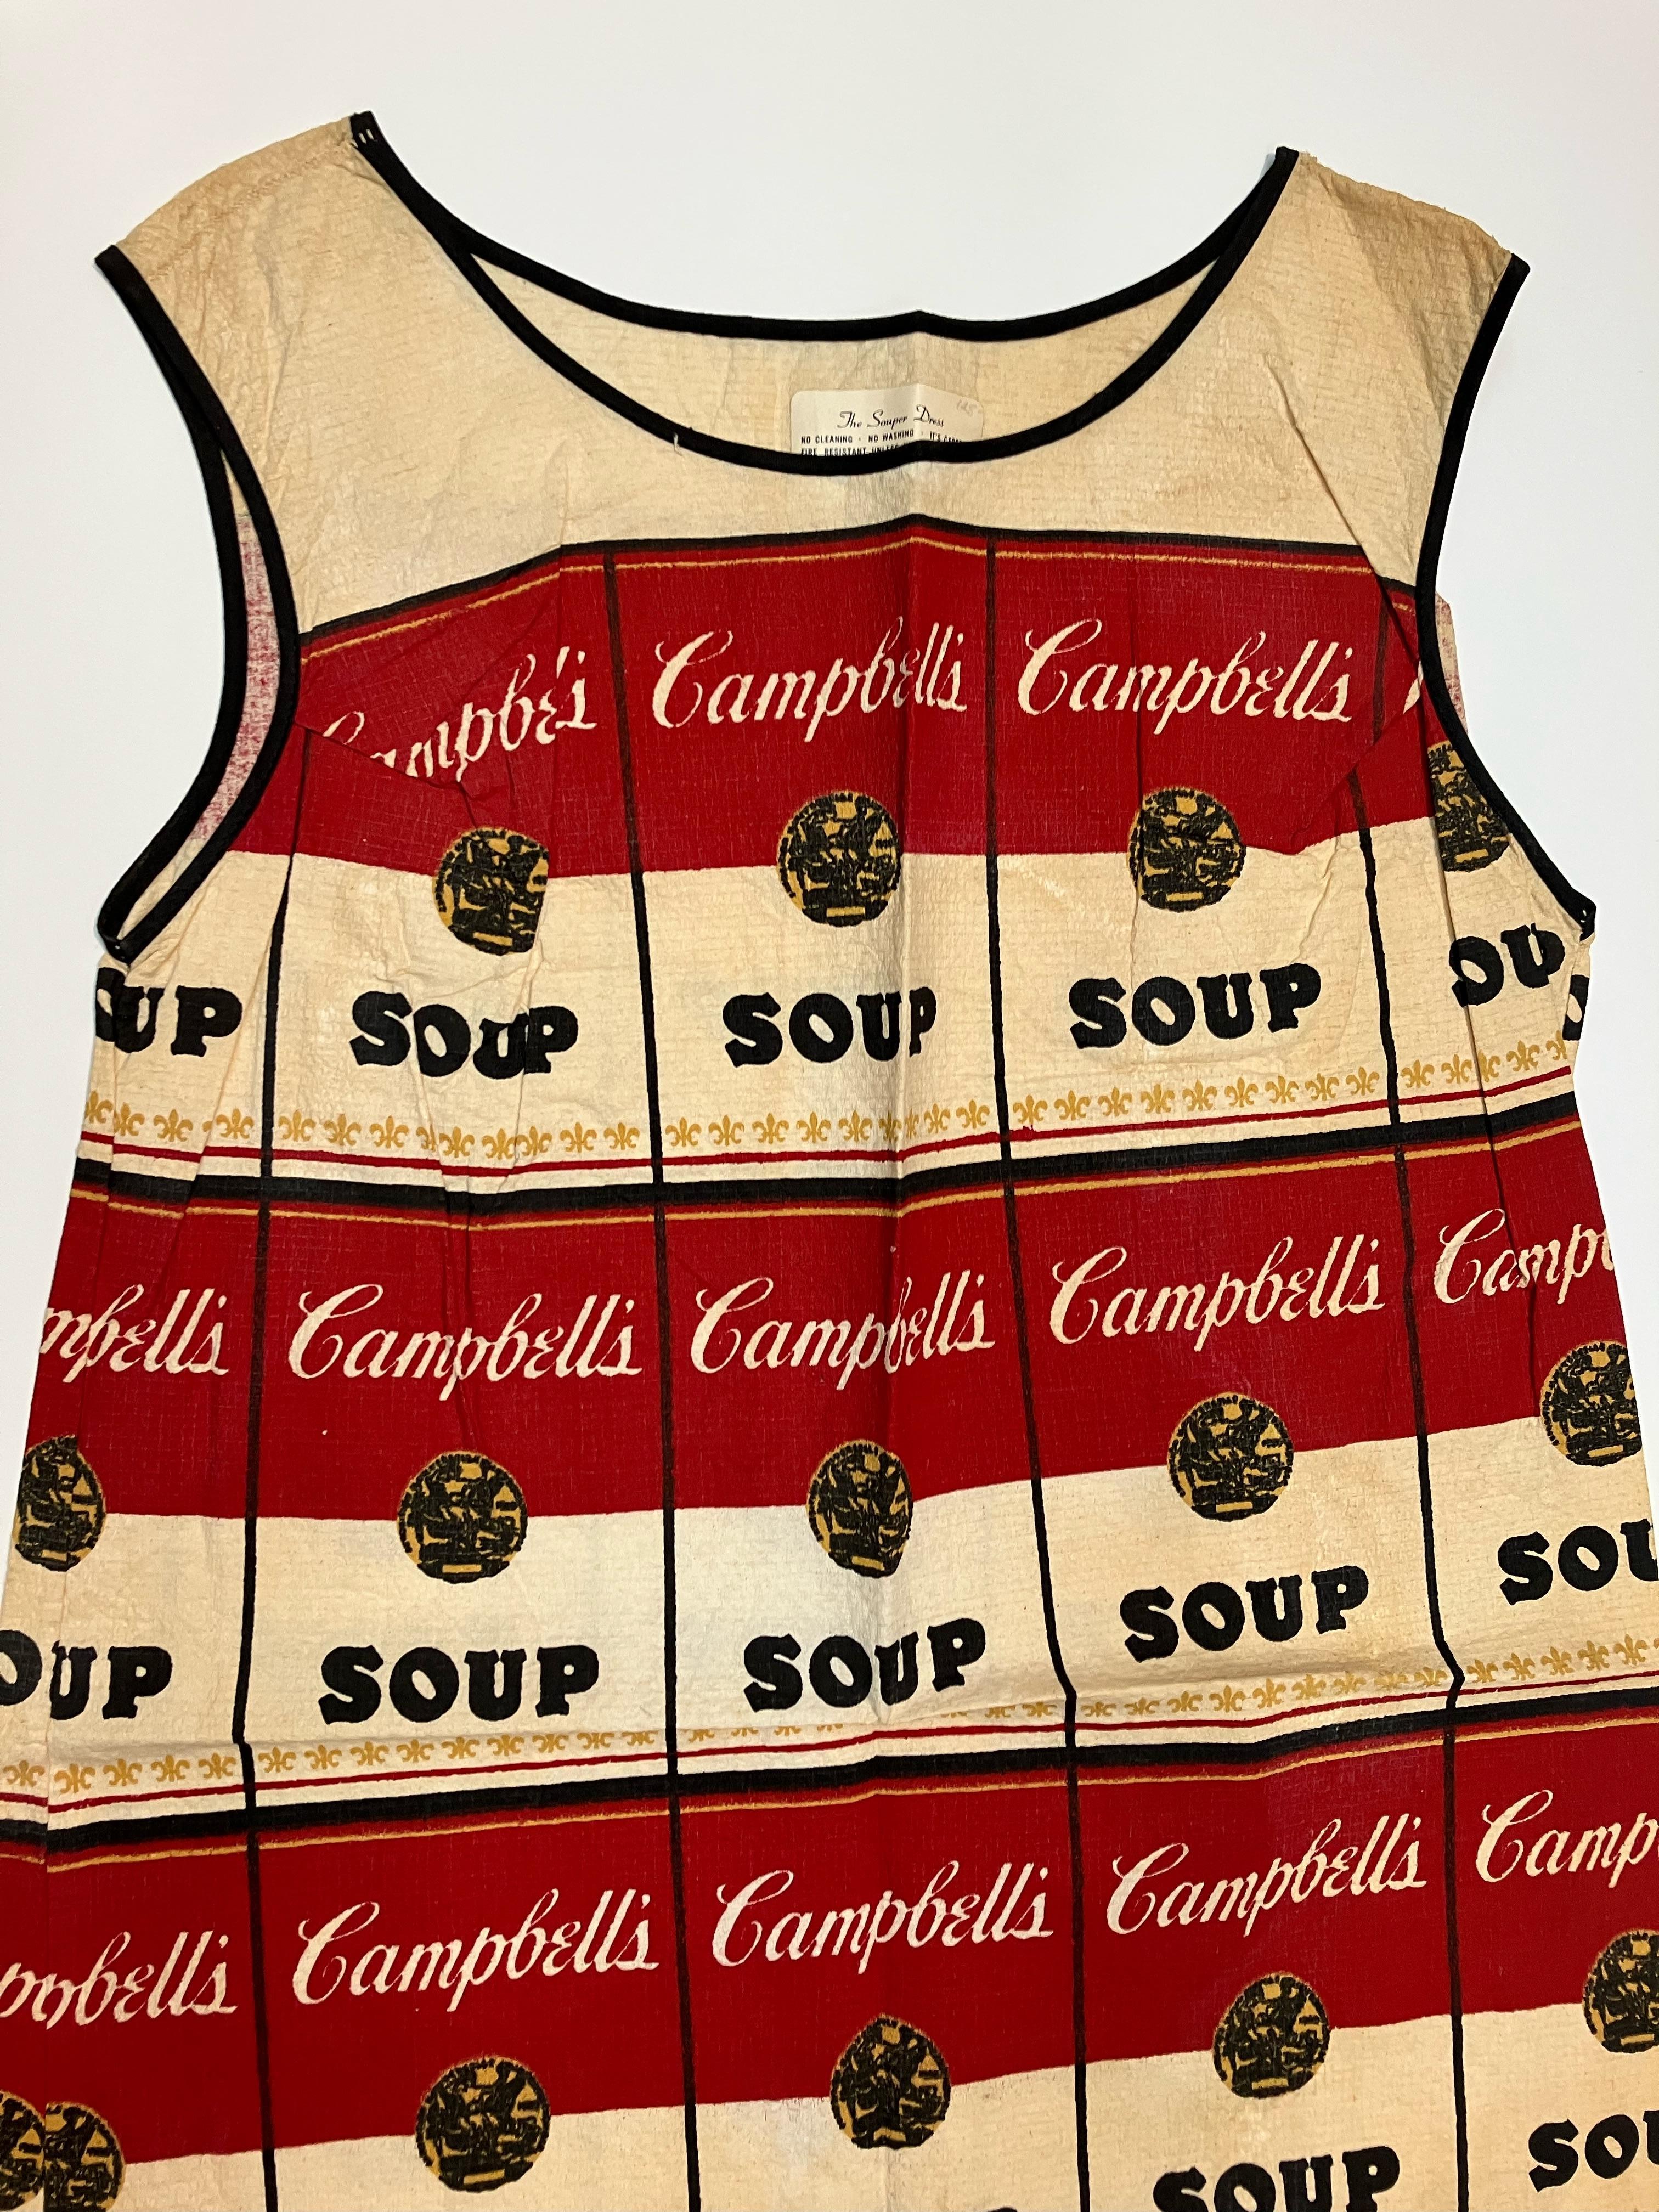 Andy Warhol The Souper Dress c. 1965-1967:
Inspired by Andy Warhol’s Campbell’s Soup Cans, this dress was sold by the Campbell’s Soup Company in the late 1960s as a form of advertisement, combining the fad of paper dresses with Warhol’s popularizing